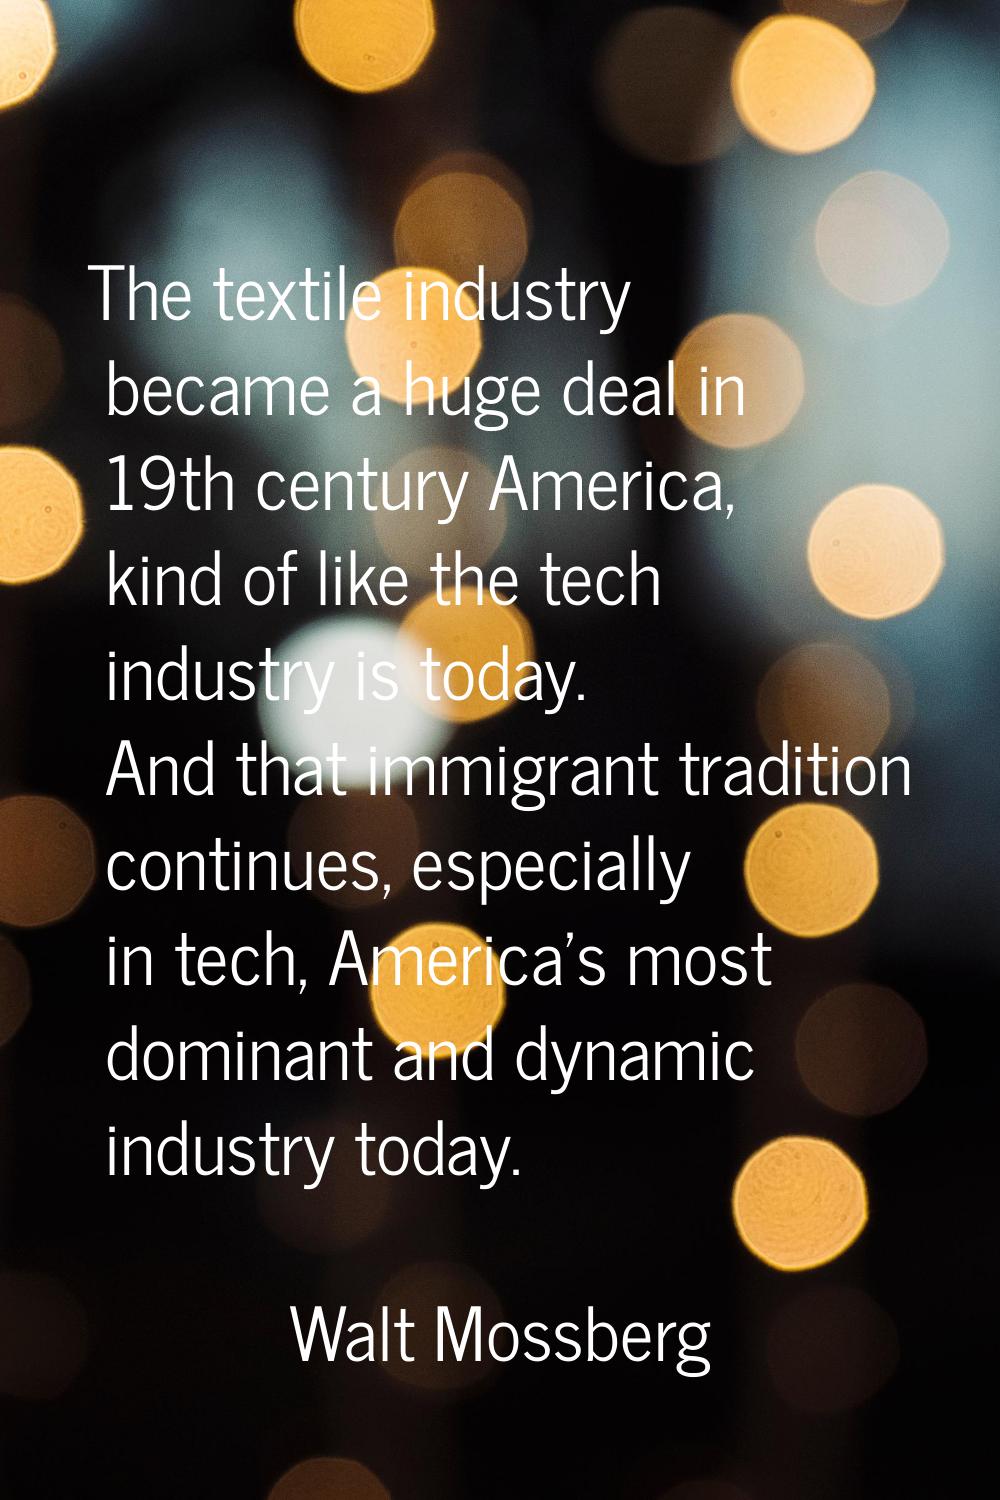 The textile industry became a huge deal in 19th century America, kind of like the tech industry is 